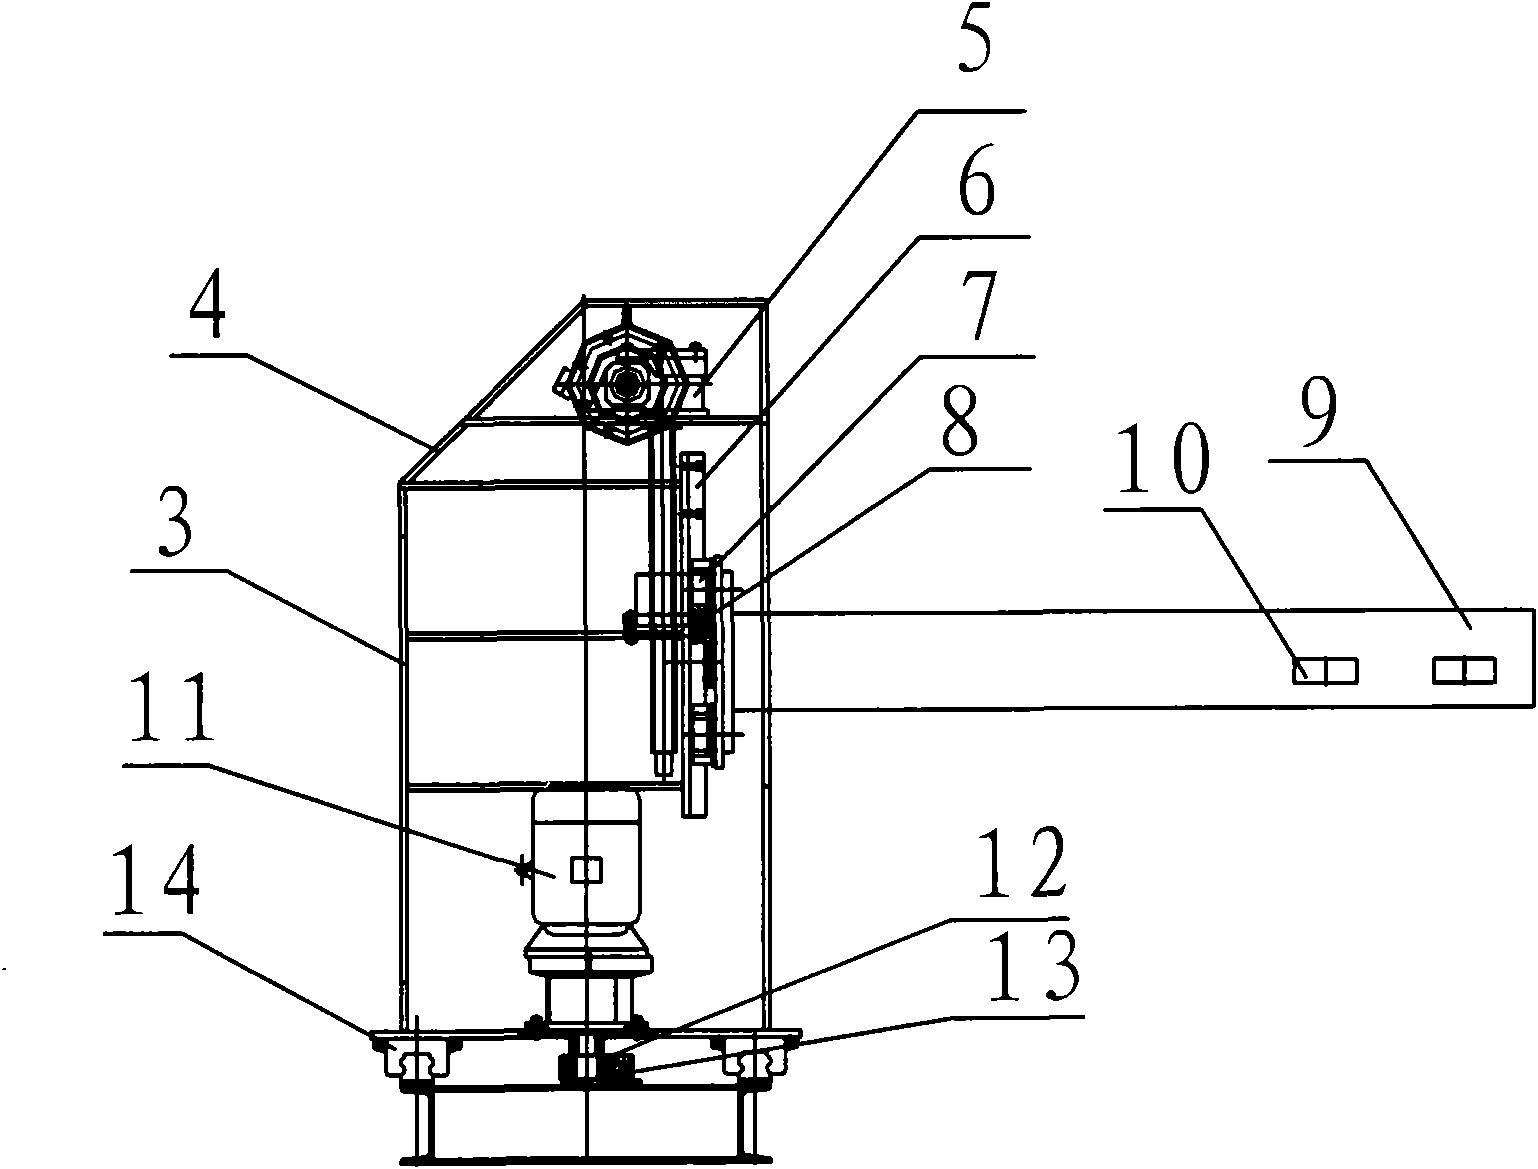 Continuous feeding system